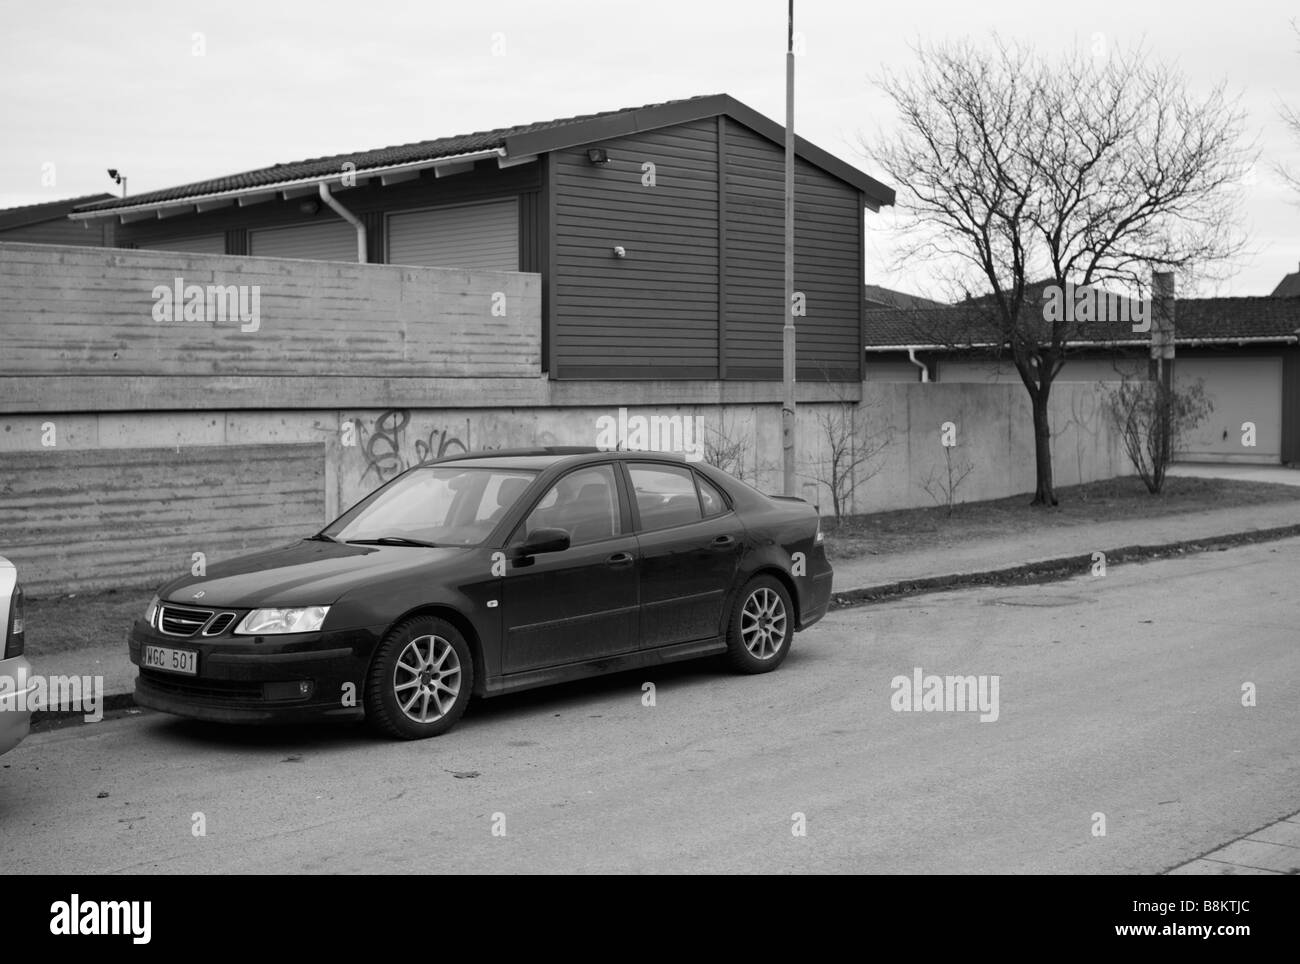 Parked SAAB 9-3 in Helsingborg, Sweden. Picture taken during their big crisis in February 2009. FOR EDITORIAL USE ONLY. Stock Photo